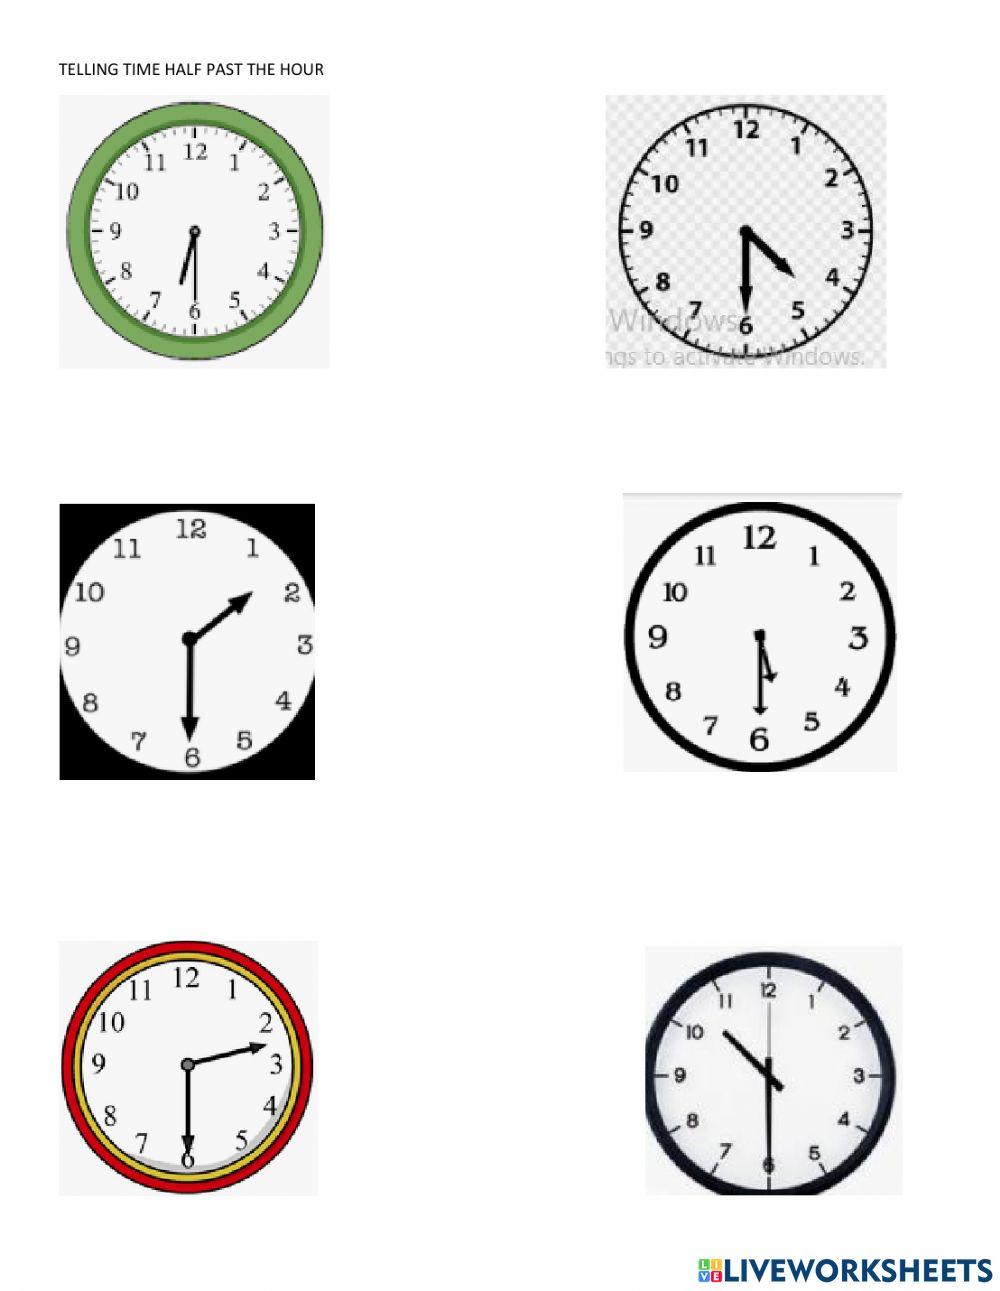 Telling Time on the hour and half past